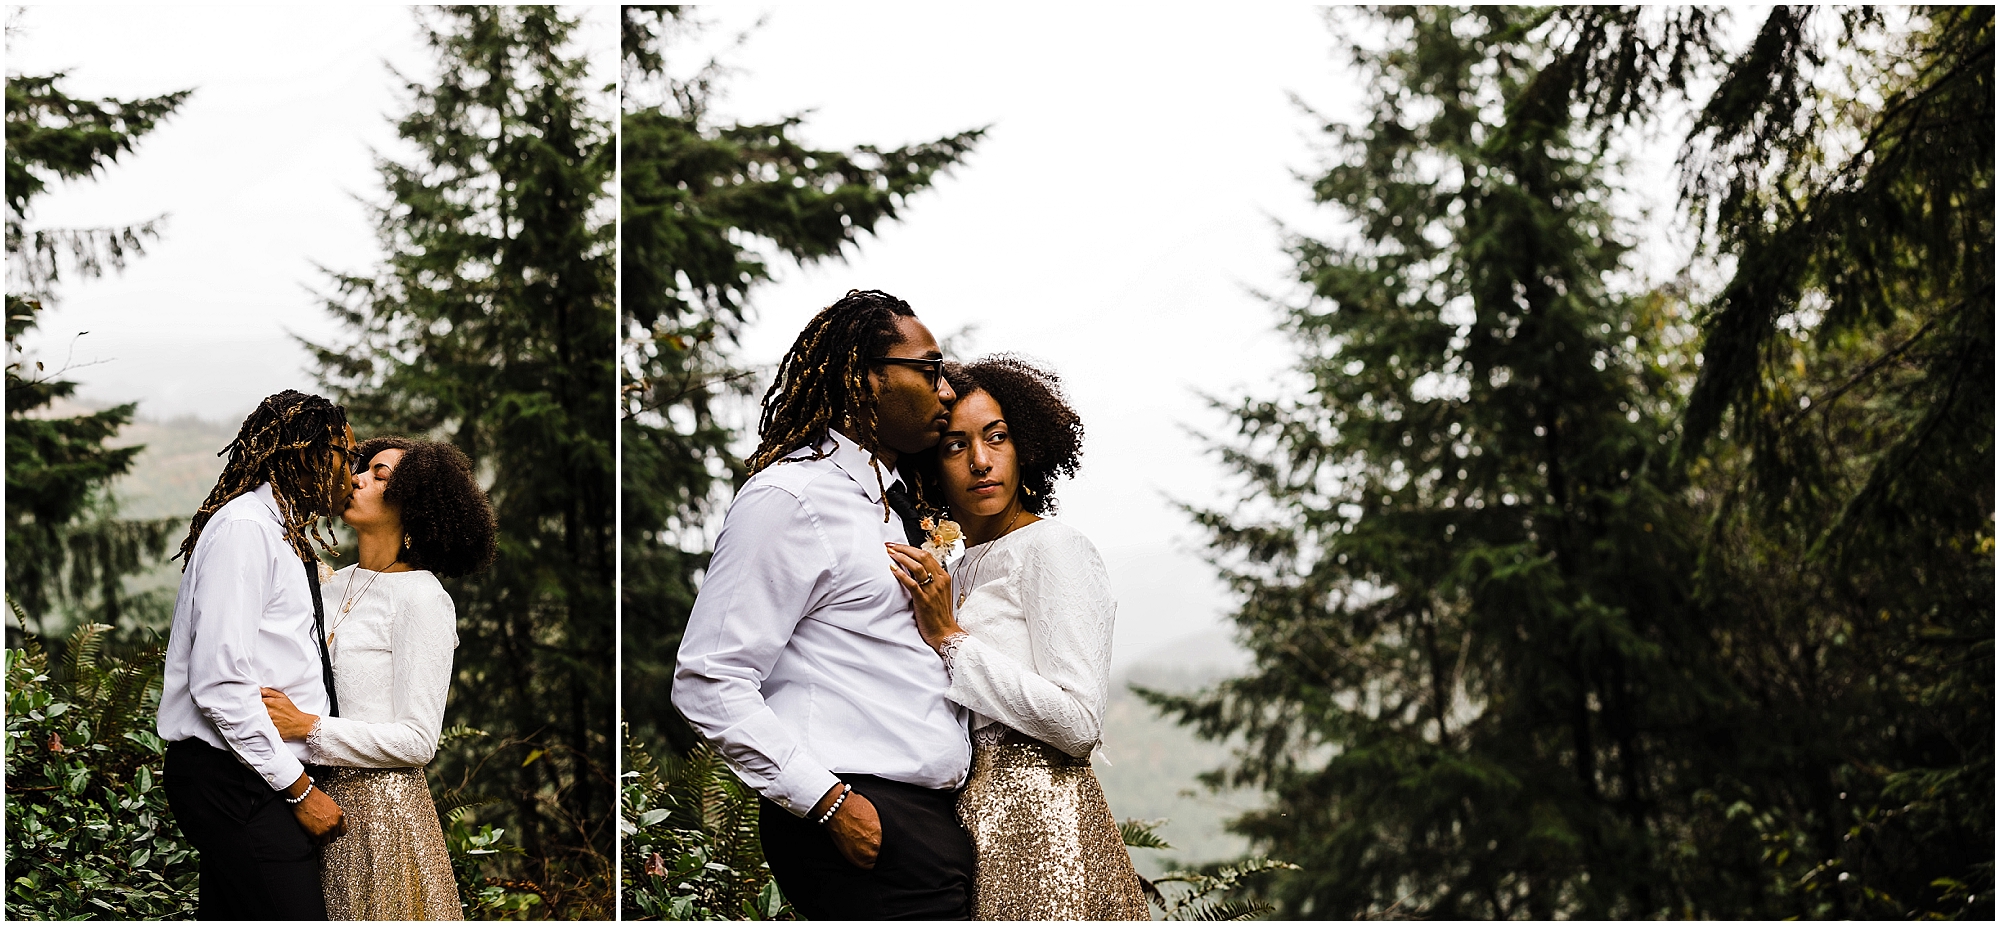 The fog hangs low in the Coastal mountains of Oregon as a lovely black couple stands wearing their wedding attire in the foreground of this Oregon Coast adventure elopement near Lincoln City. | Erica Swantek Photography